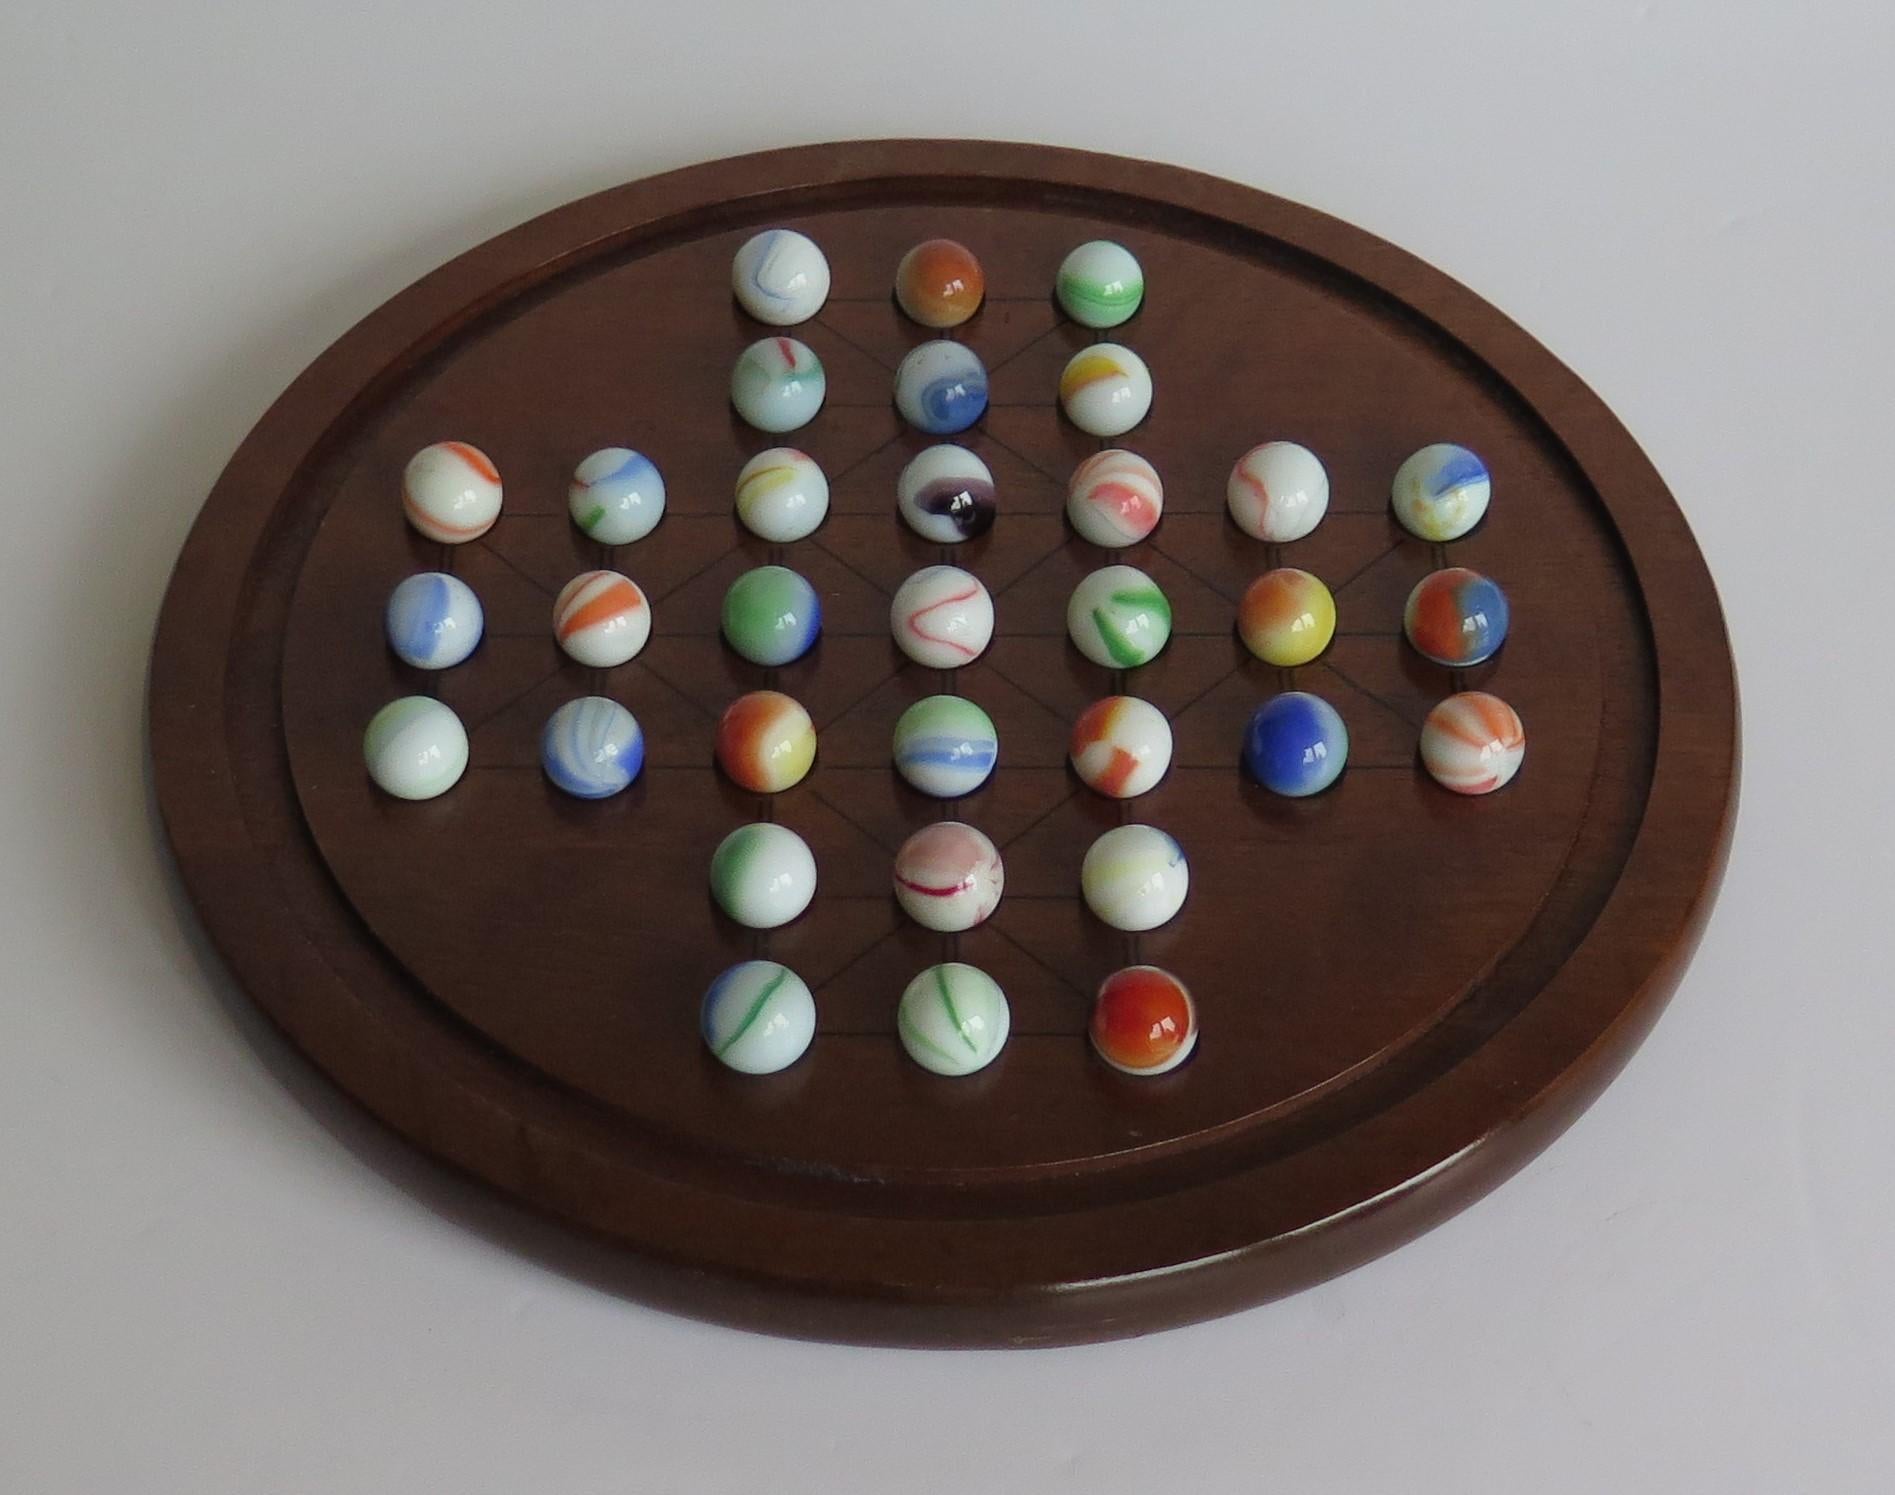 English Marble Solitaire Game Hardwood Board with 33 Old Glass swirl Marbles